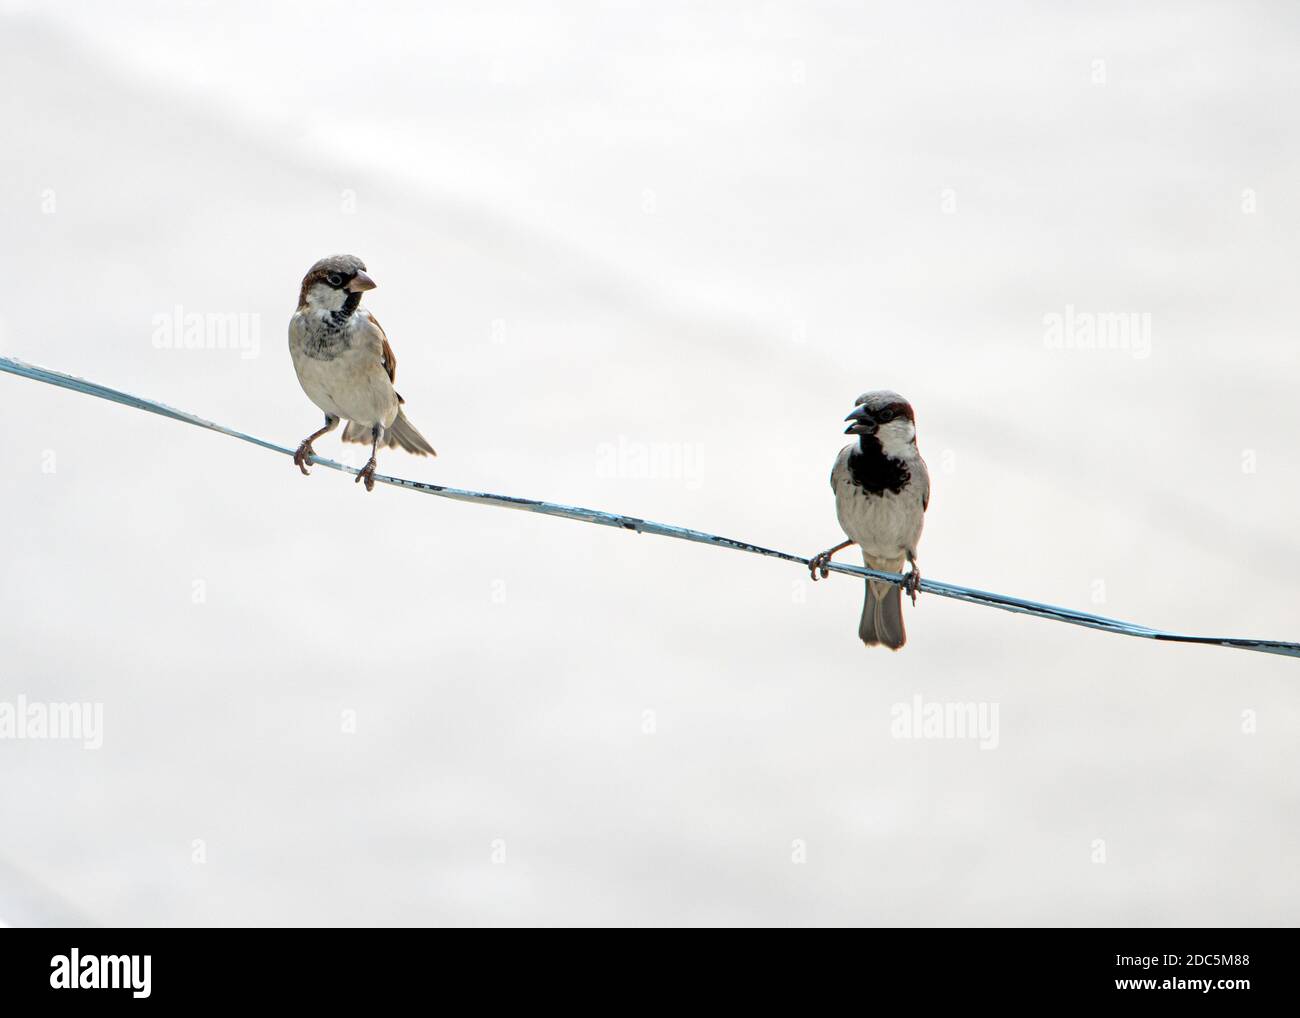 A pair of bird standing on a wire and adjust his feathers. Oriental Magpie Robin - Copsychus saularis standing on electricity cable at city street, Th Stock Photo